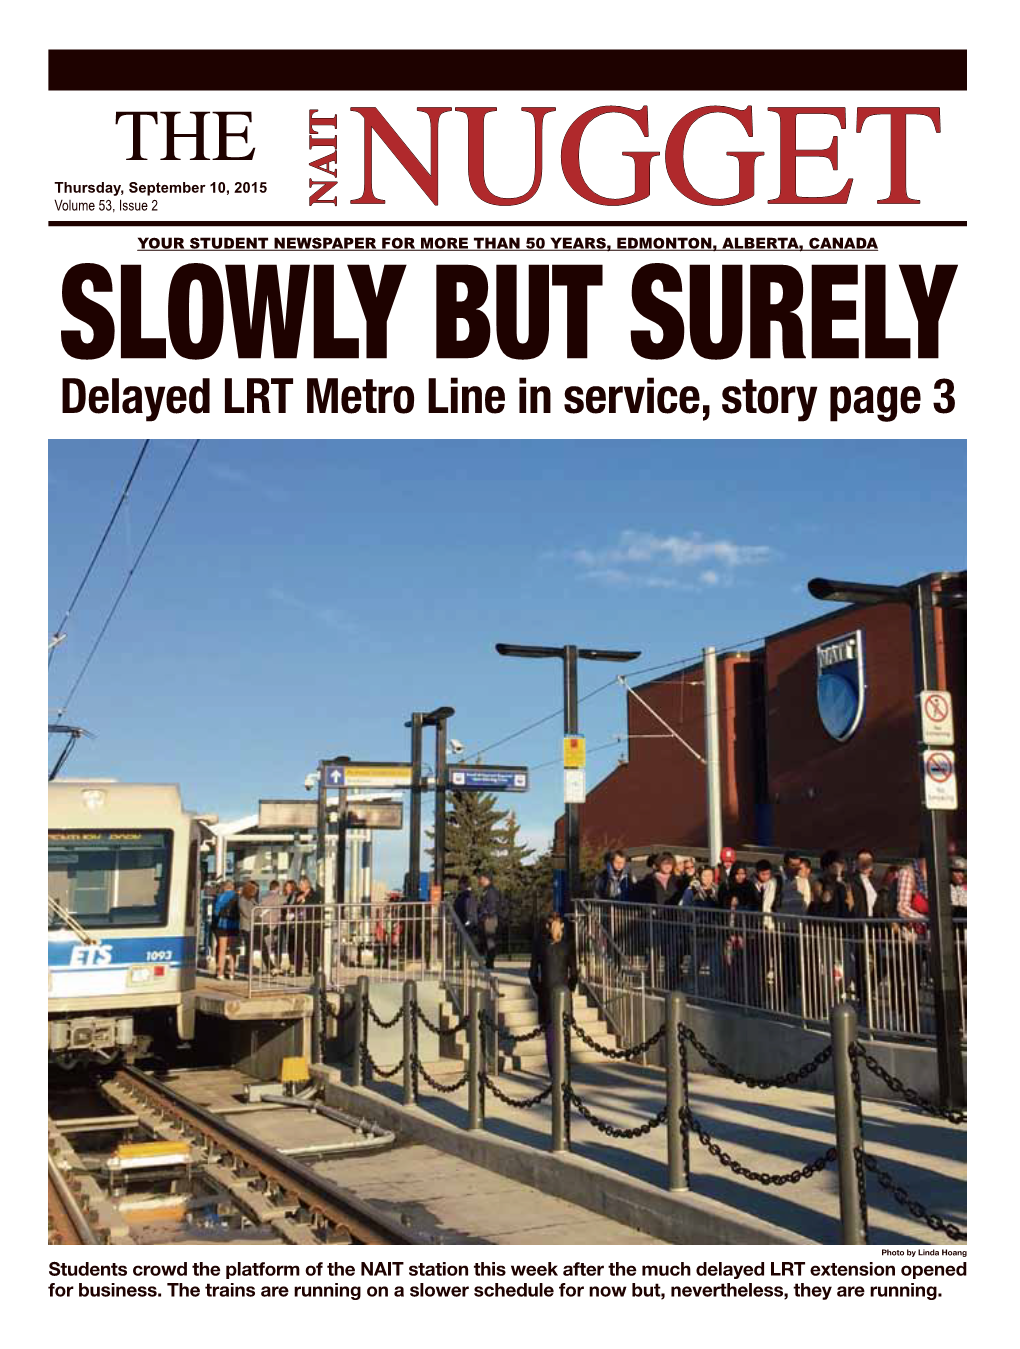 Delayed LRT Metro Line in Service, Story Page 3